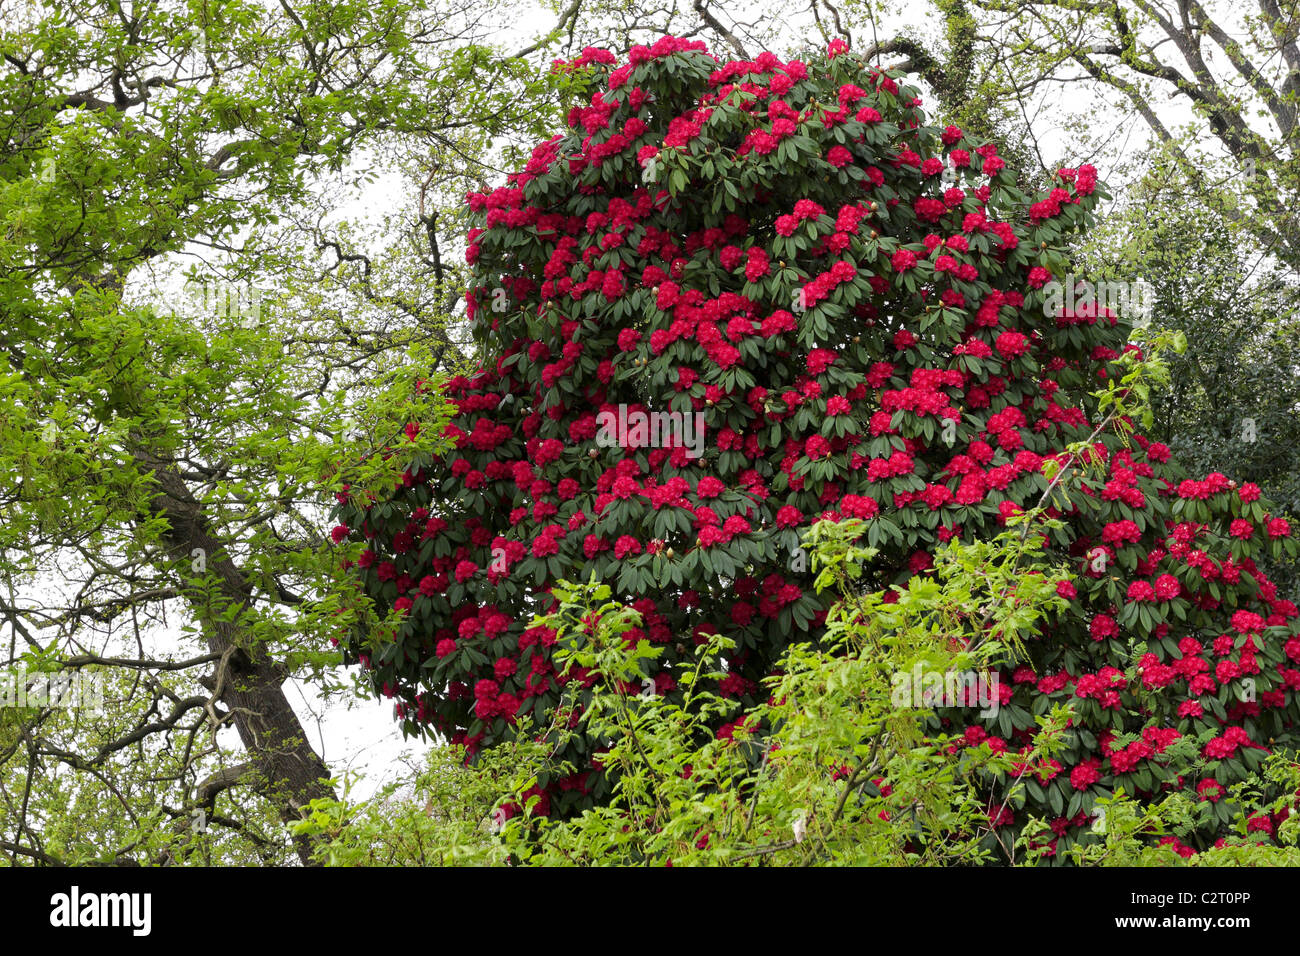 The tallest and without doubt the largest azalea tree the photographer has ever come across in his journeys around London. Stock Photo